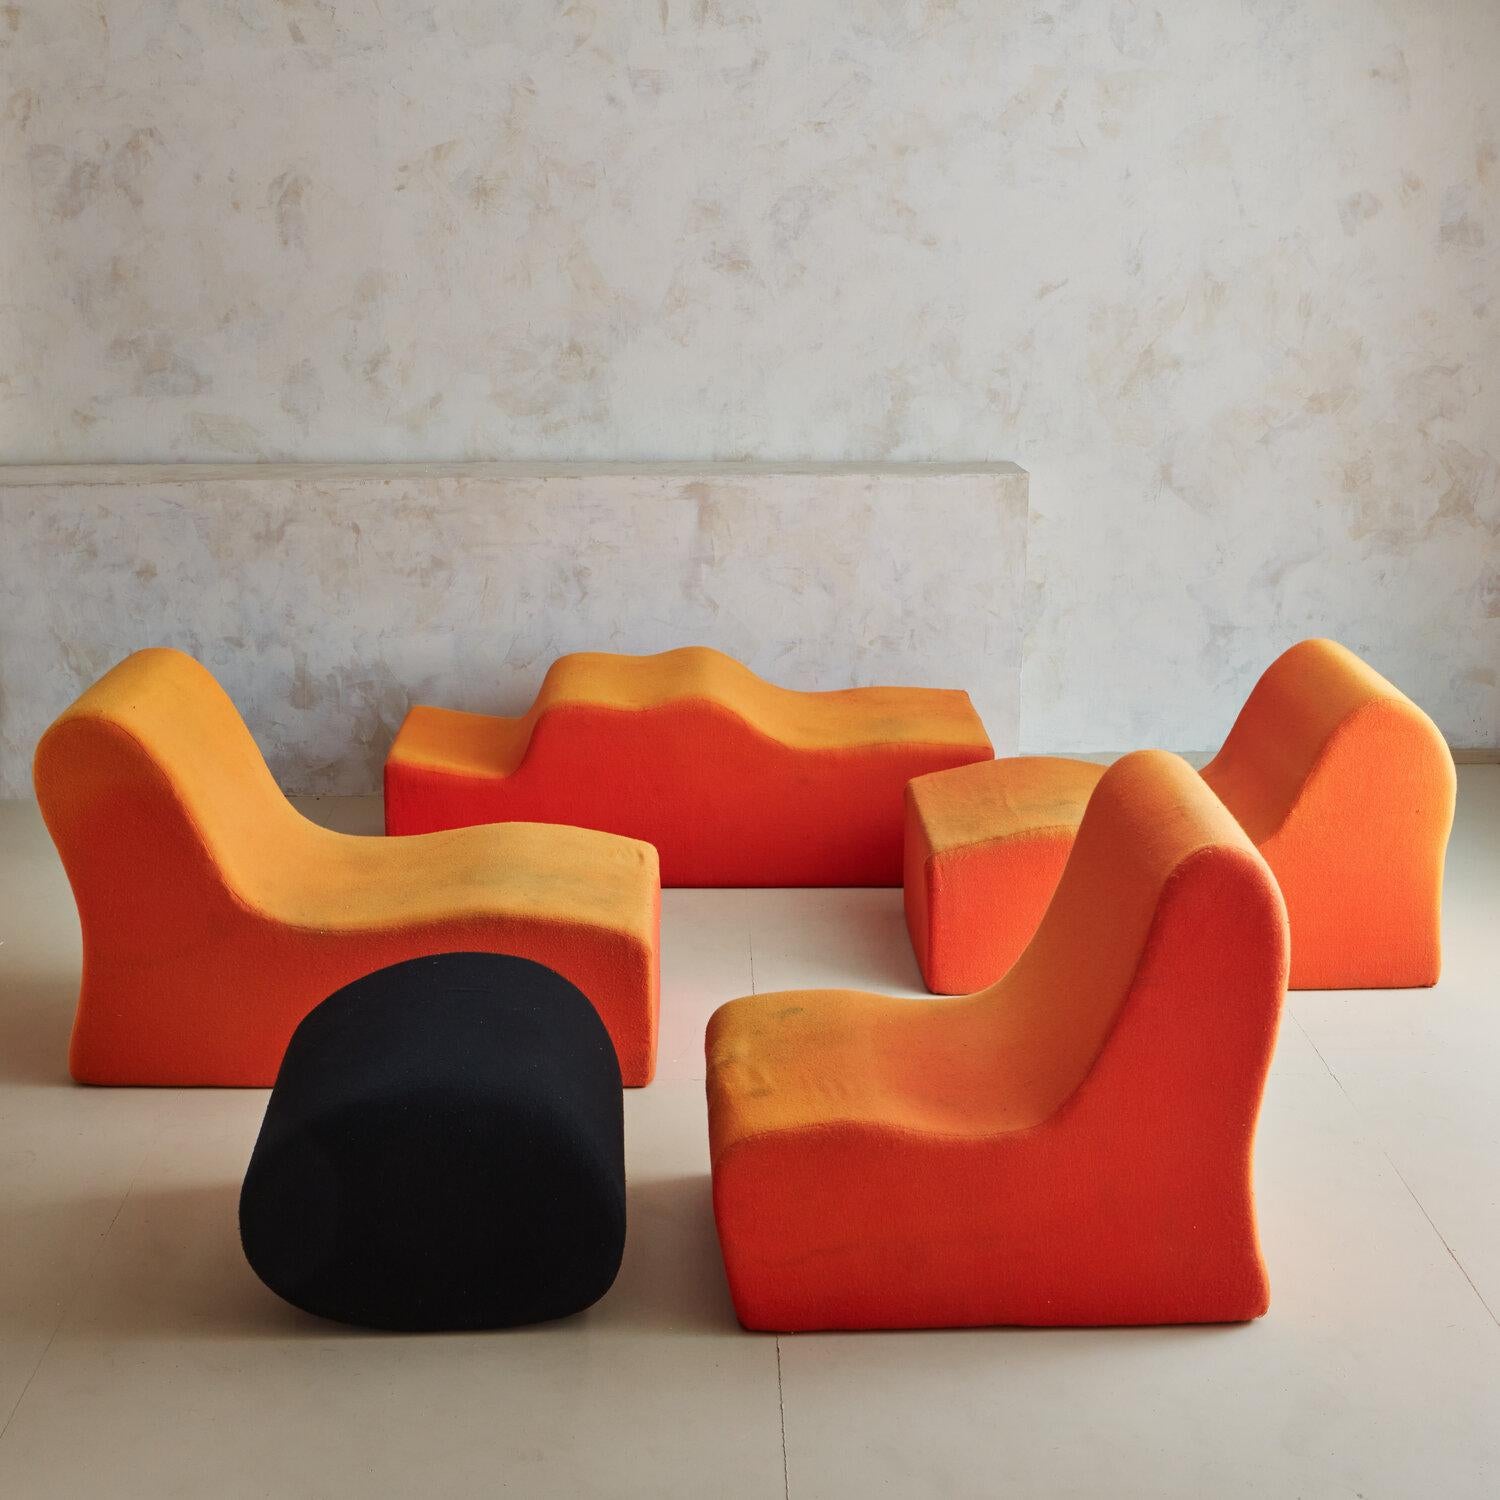 An organic, modular 5-piece collection of polyurethane foam shapes that function as a seating arrangement and also assemble into a sculptural block. Designed by Roberto Matta (Chilean, 1911-2002) in 1966 and manufactured by Gavina of Italy, this